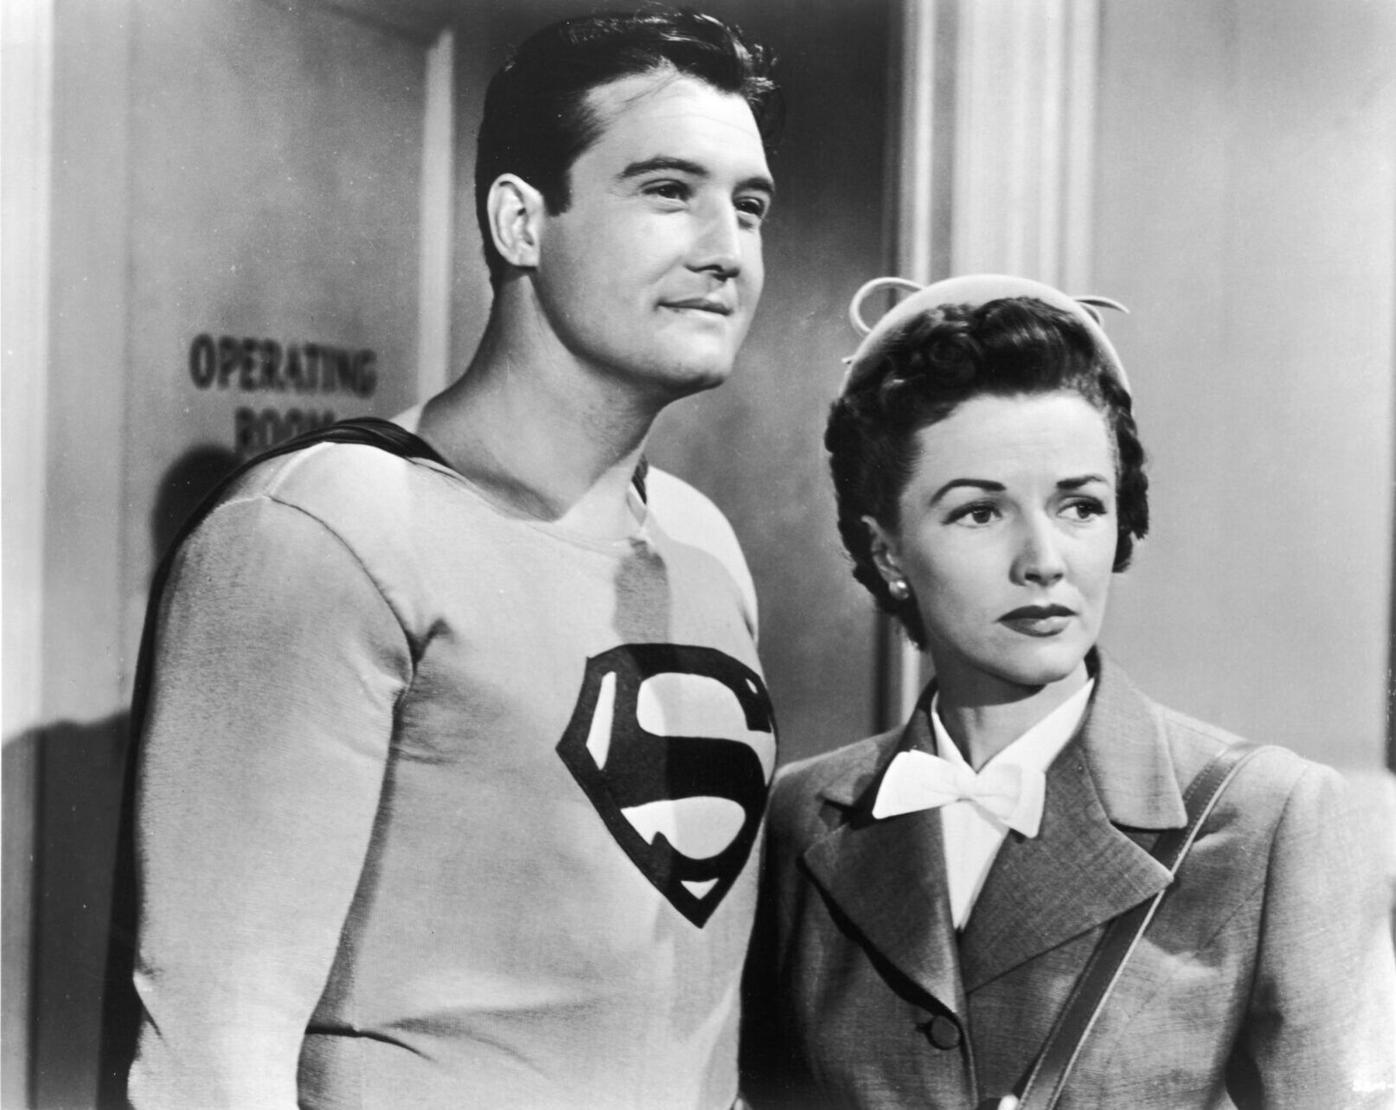 Lois Lane in search of Superman